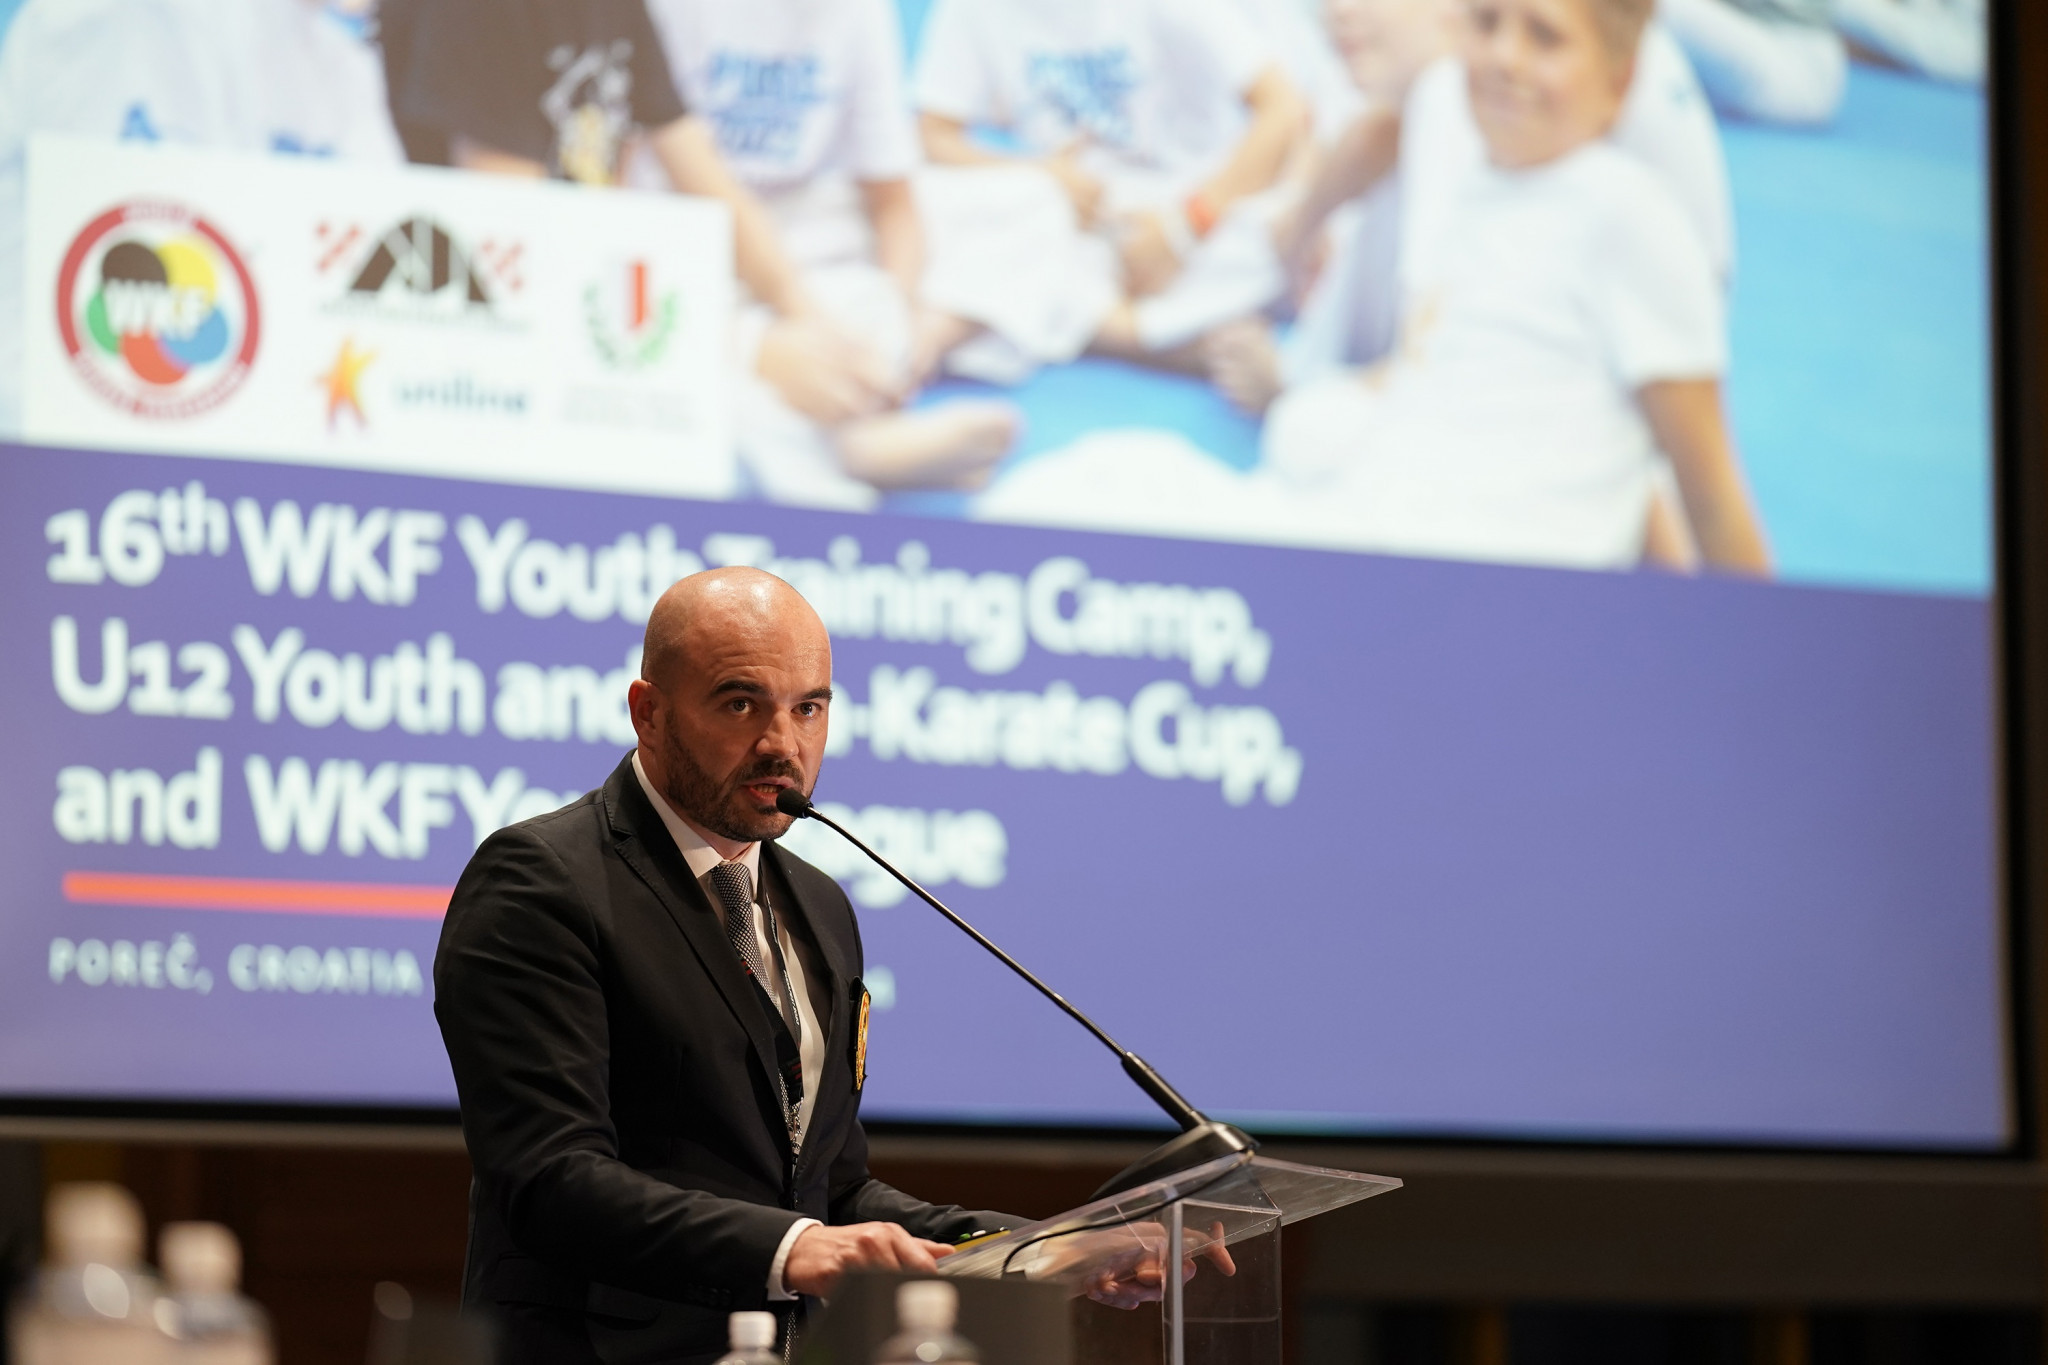 Davor Cipek, assistant general secretary at the WKF, delivered a speech about the WKF Youth Training Camp which is held annually in Croatia ©WKF